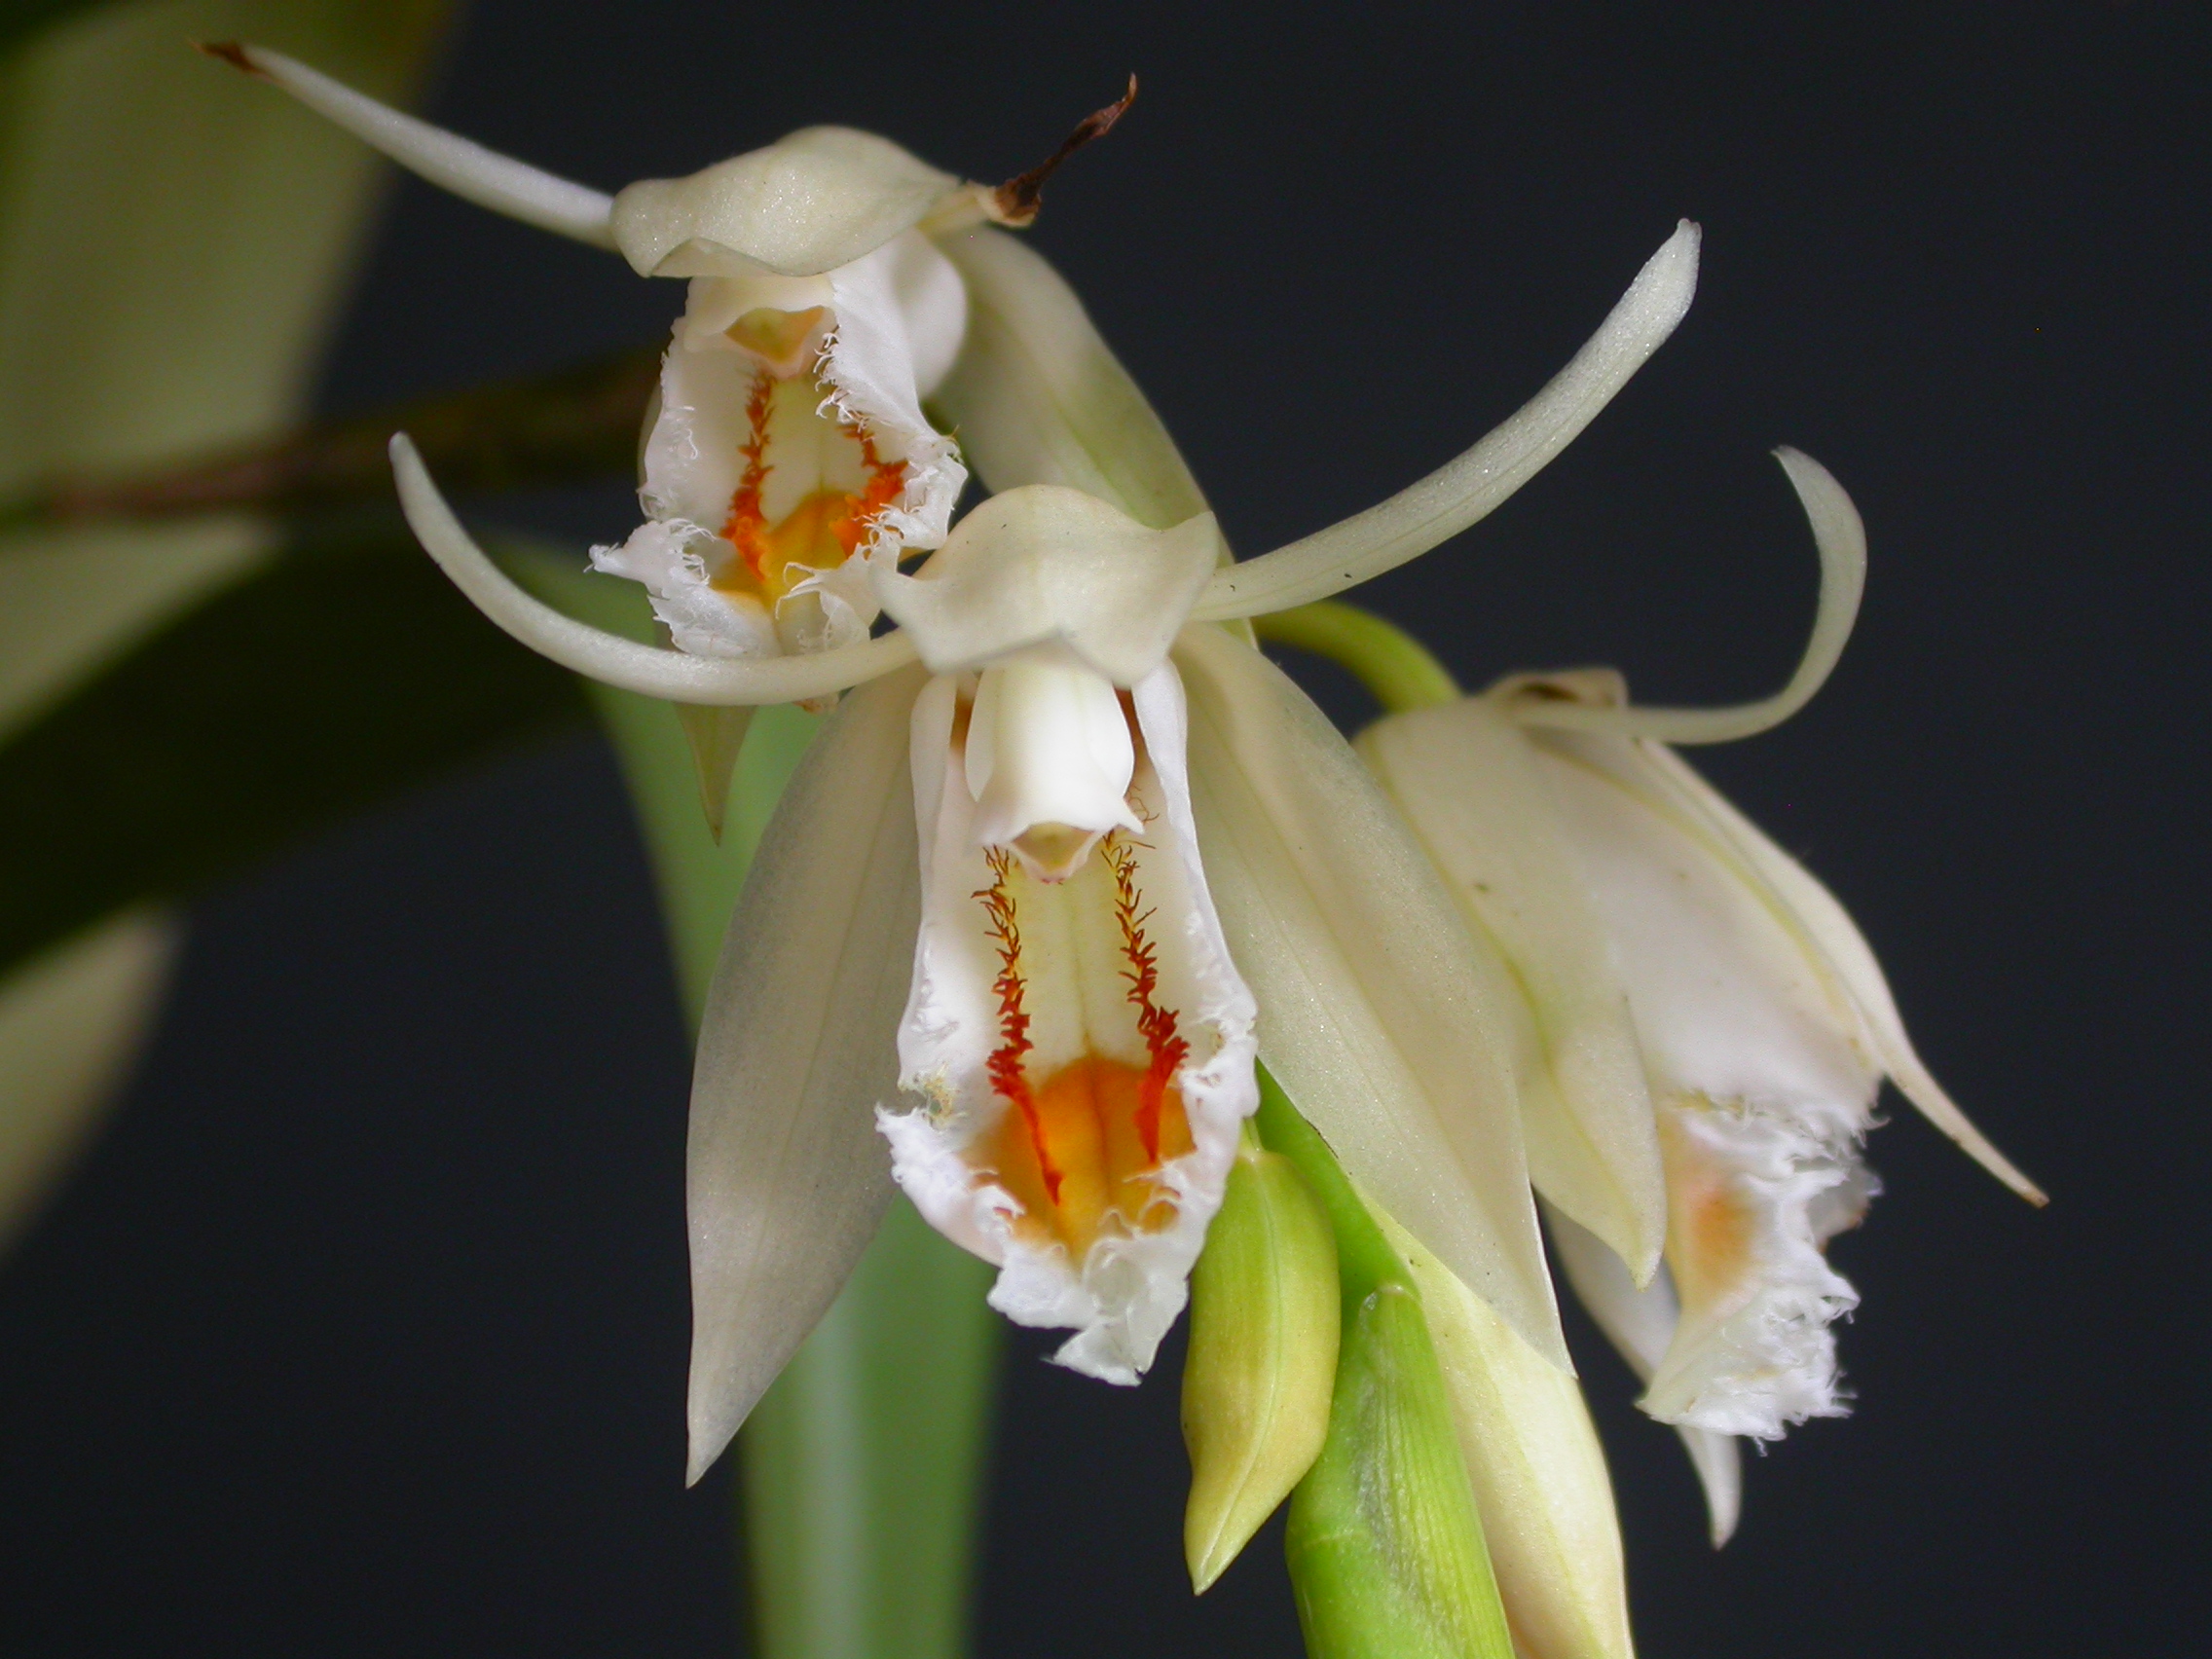 http://images4.wikia.nocookie.net/__cb20090504200414/orchids/en/images/a/a4/Coelogyne_calcicola.jpg